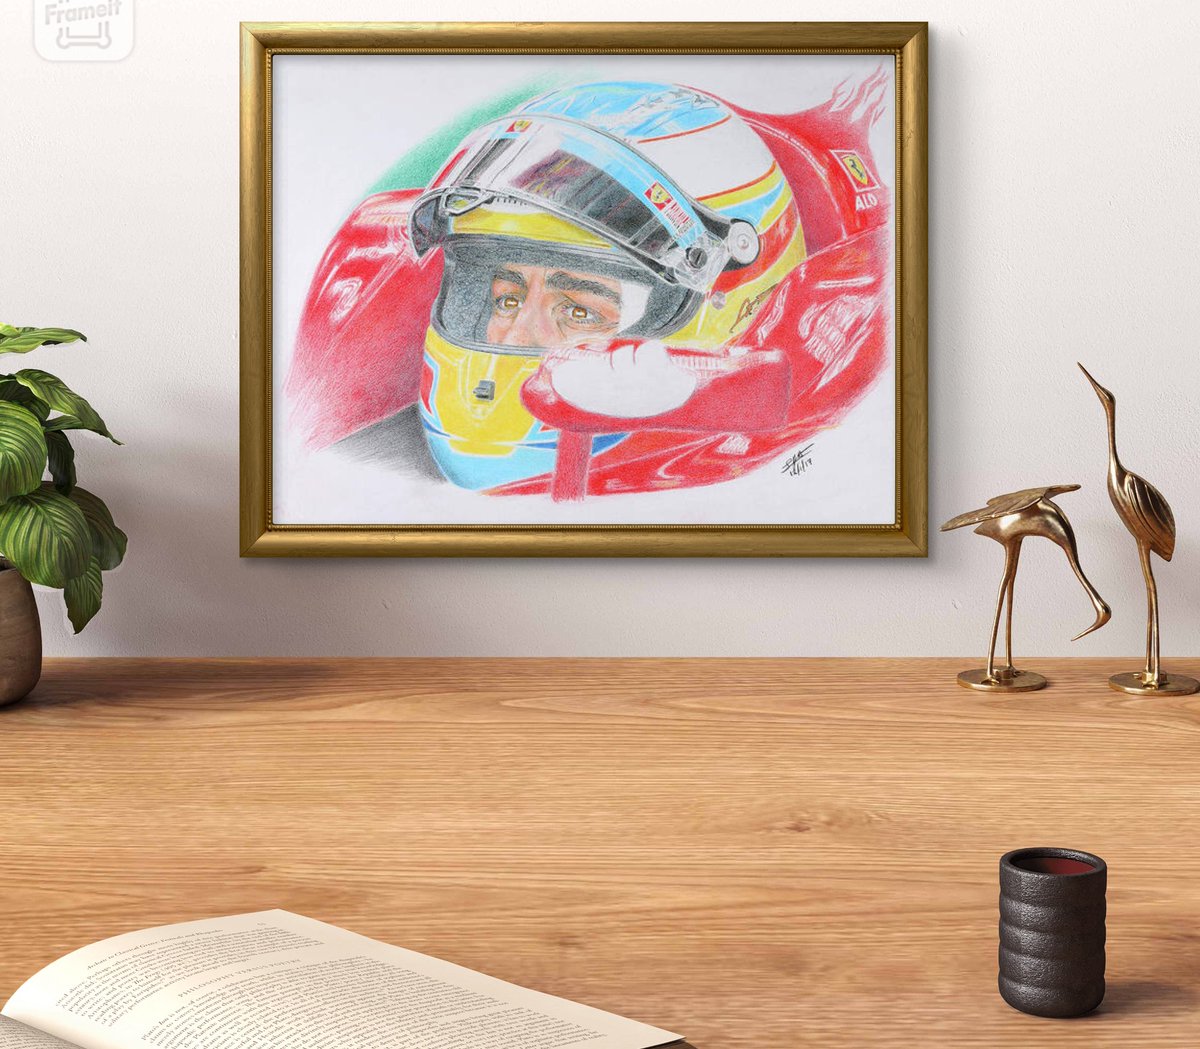 Fernando Alonso on board of his Ferrari before an epic victory at the F1 Korean GP in 2010 in horrible weather.
Get it ! at the link below in my comment.
Original for sale.
#FernandoAlonso #ferrari #vintagecar #handmade #madeinitaly #interiorstyling #racing #portrait #Formula1